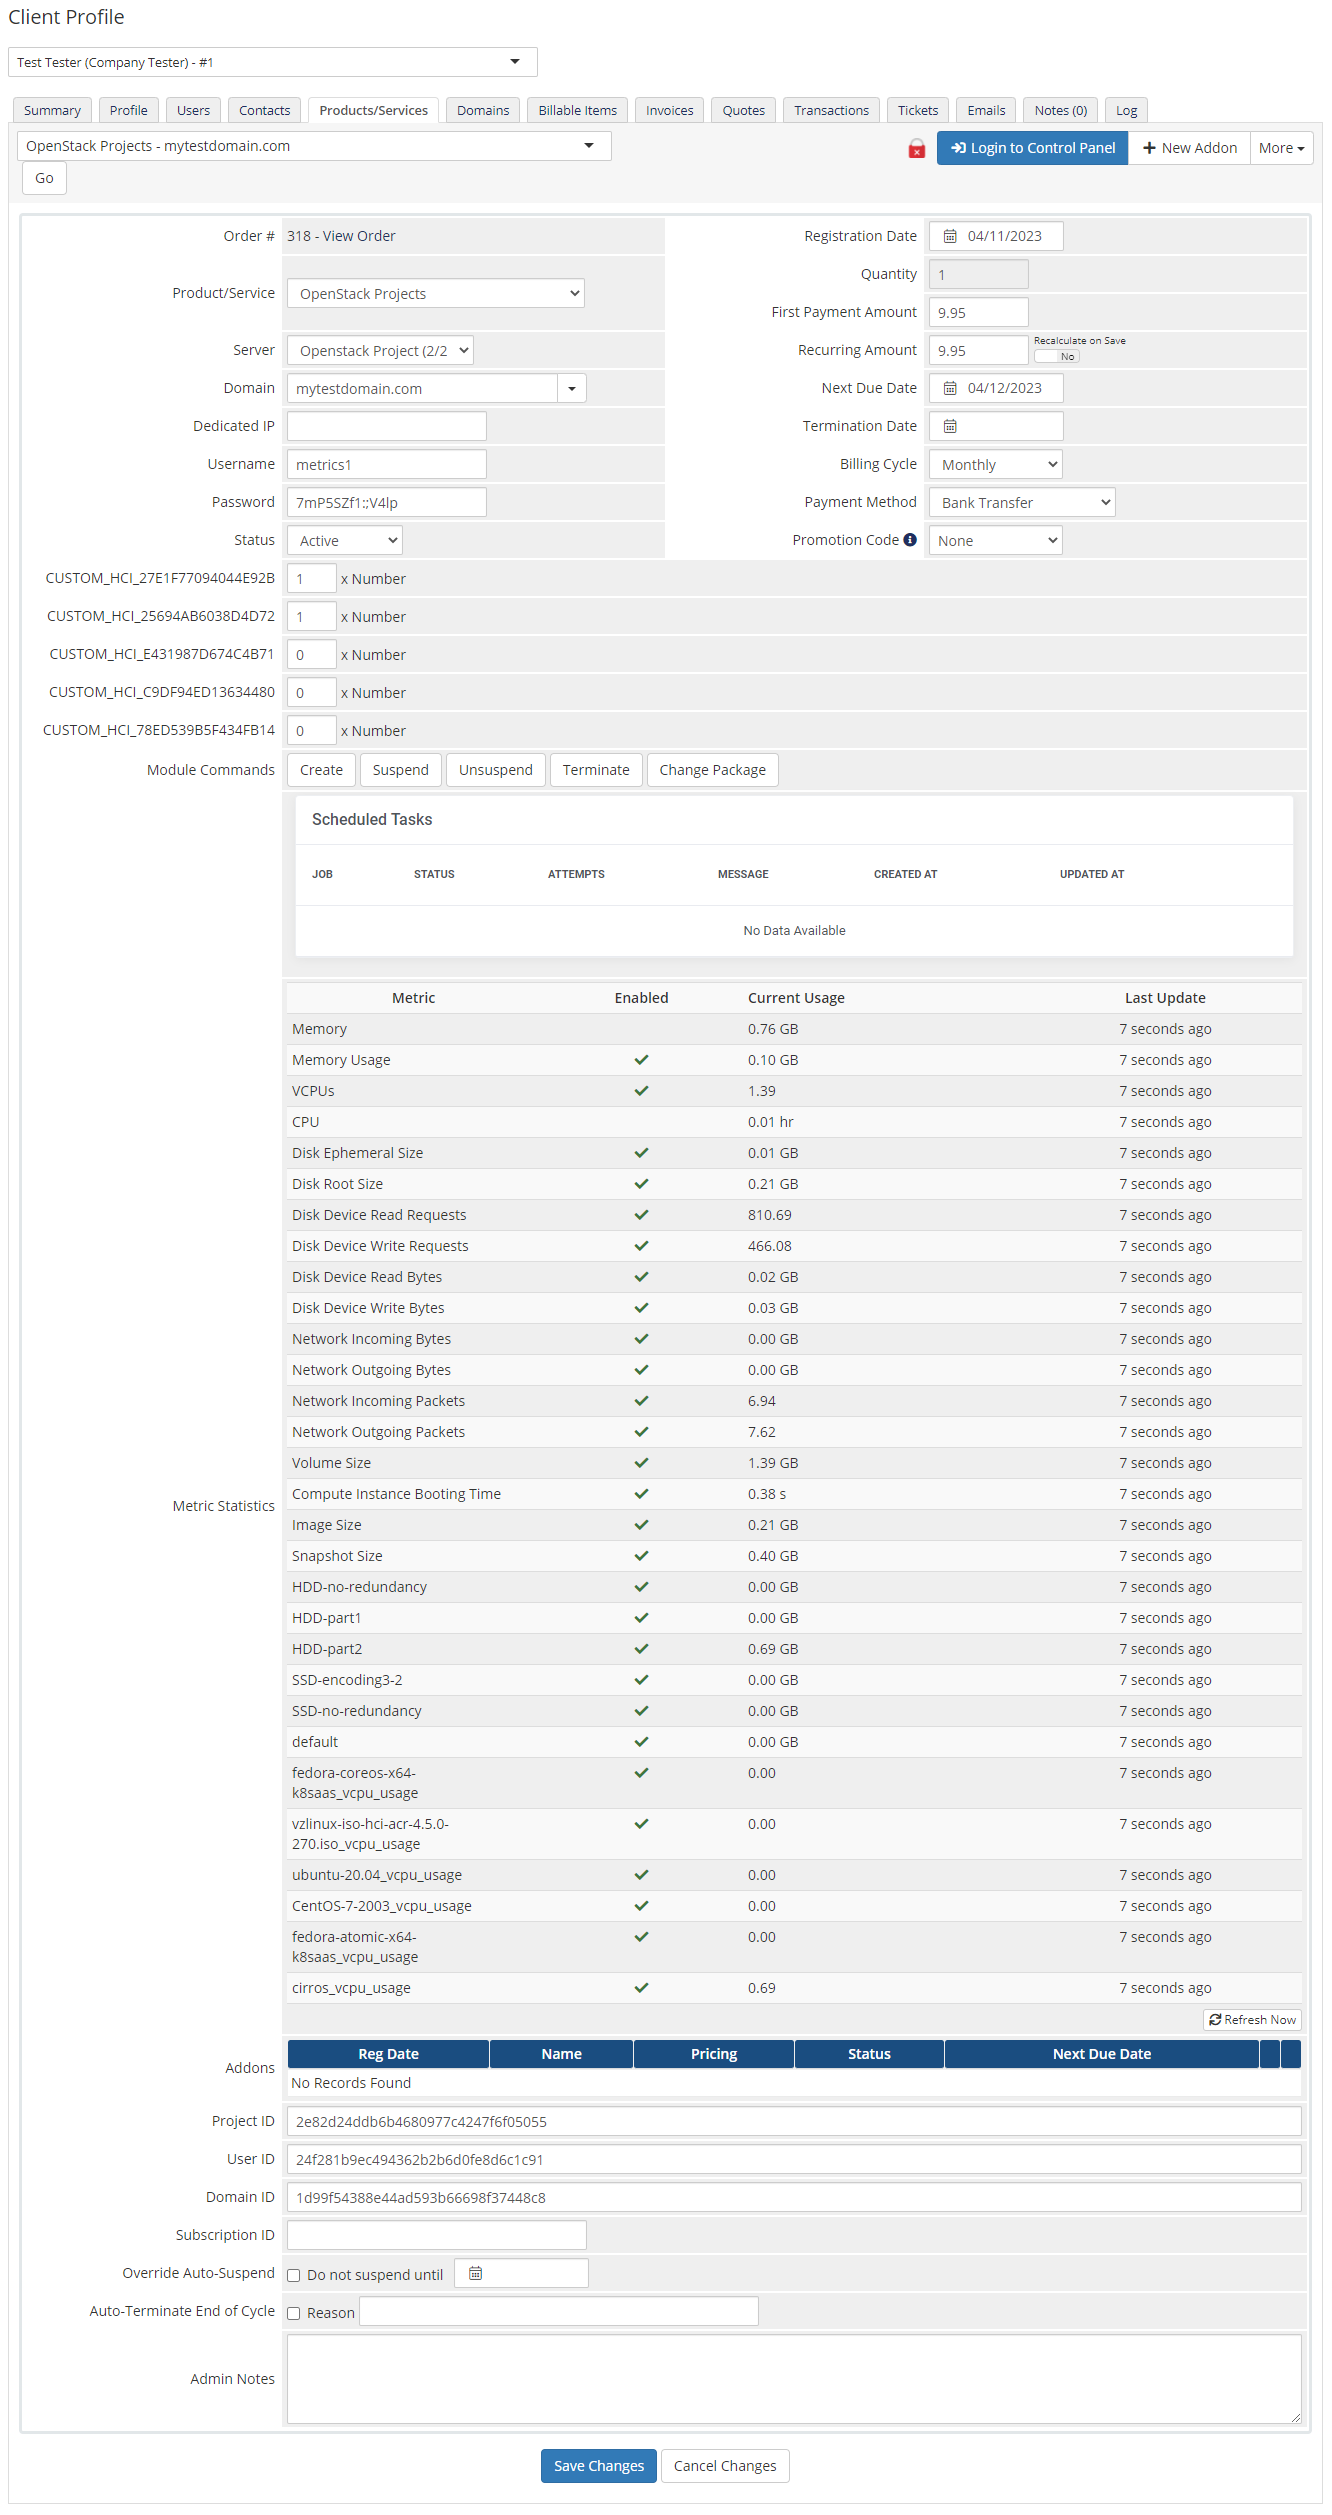 OpenStack Projects For WHMCS: Module Screenshot 5